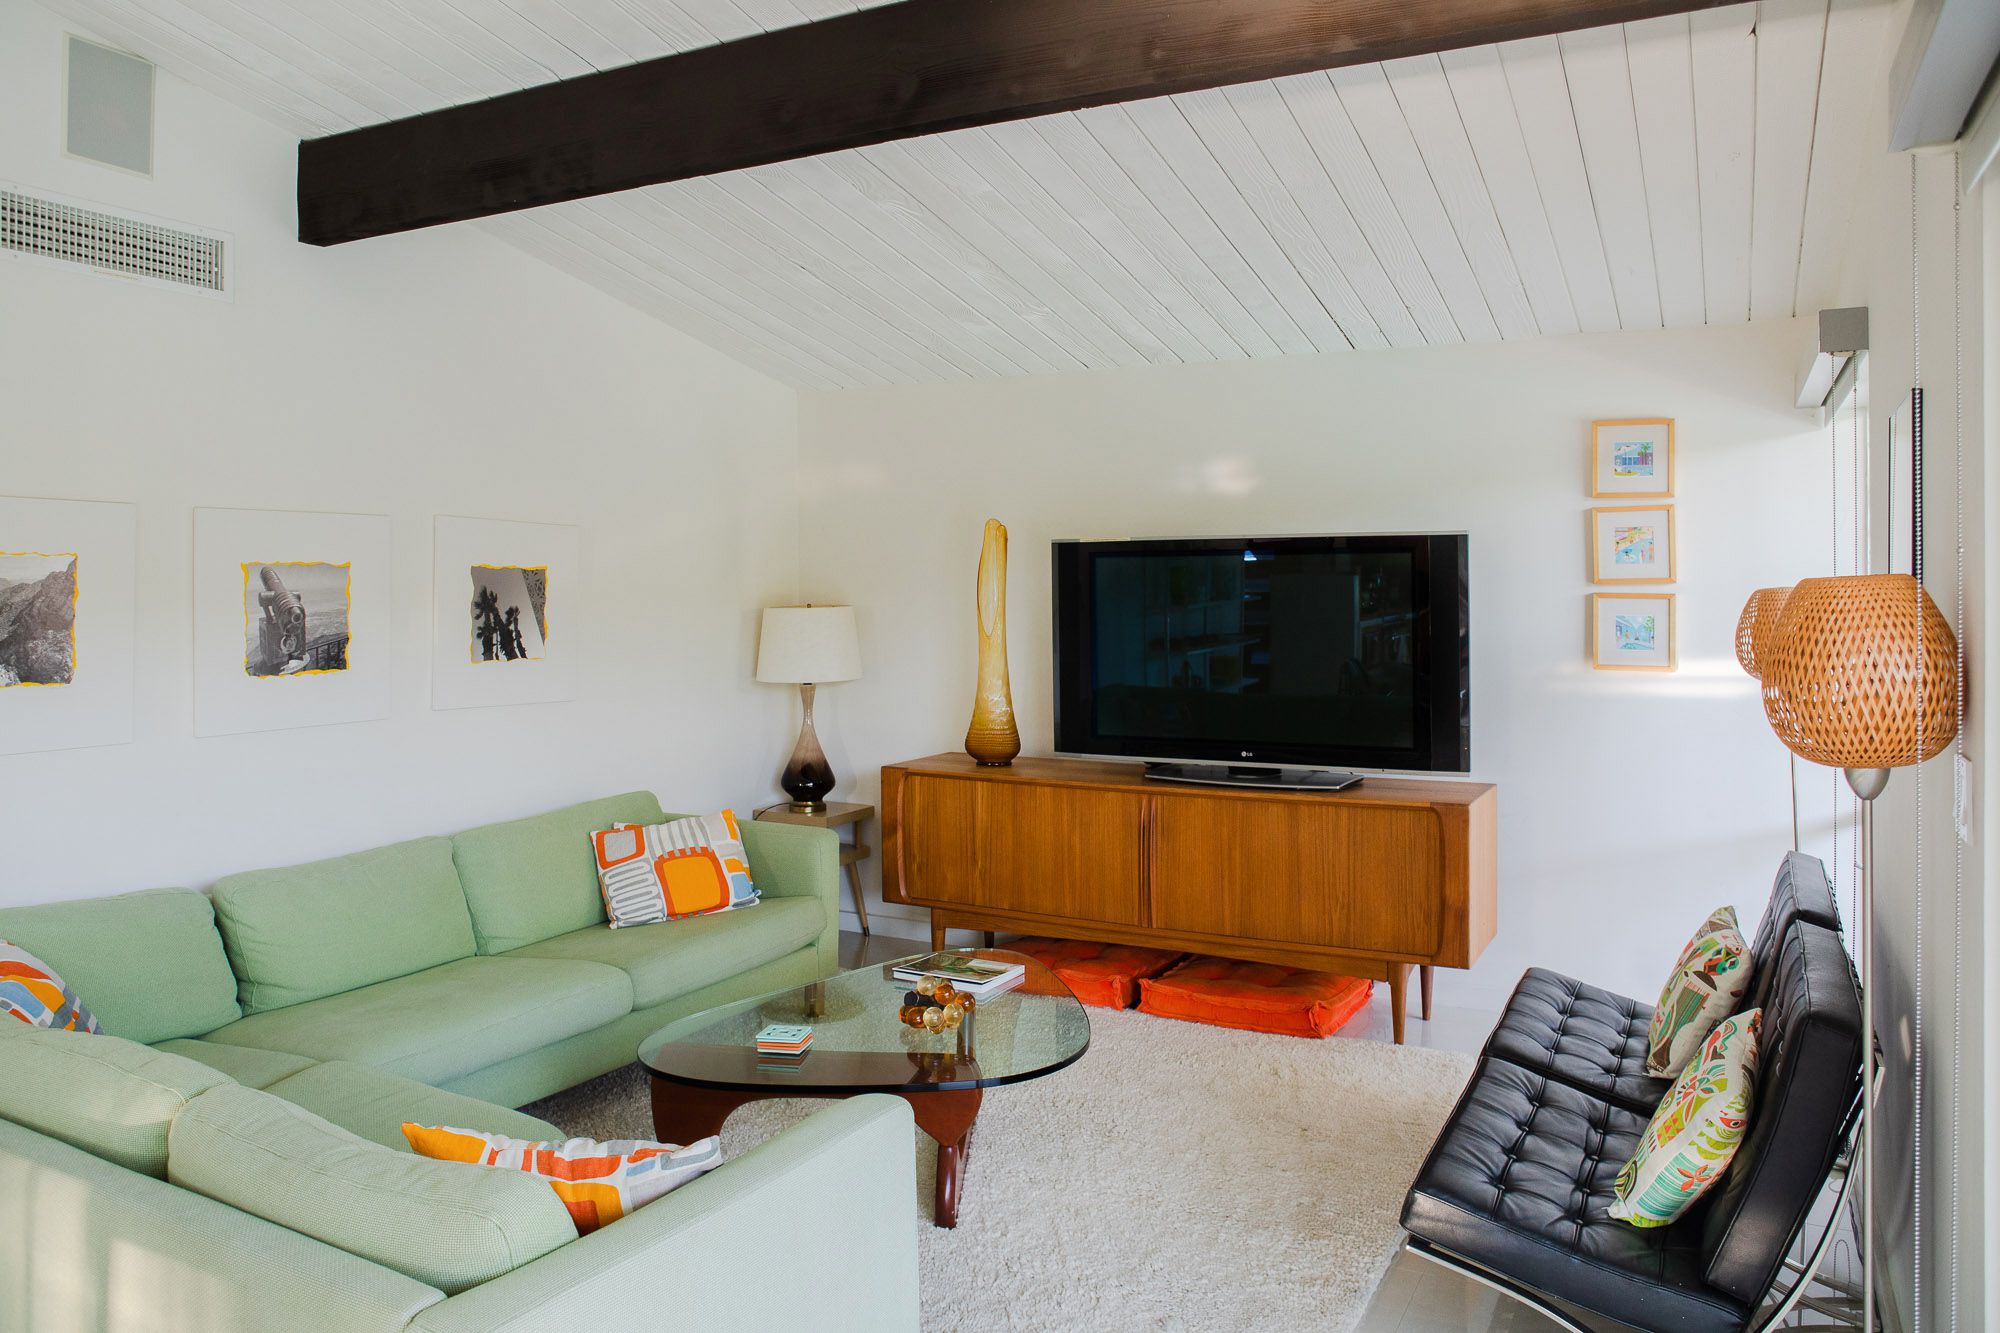 11 Essential Elements for Your Midcentury Modern Living Room